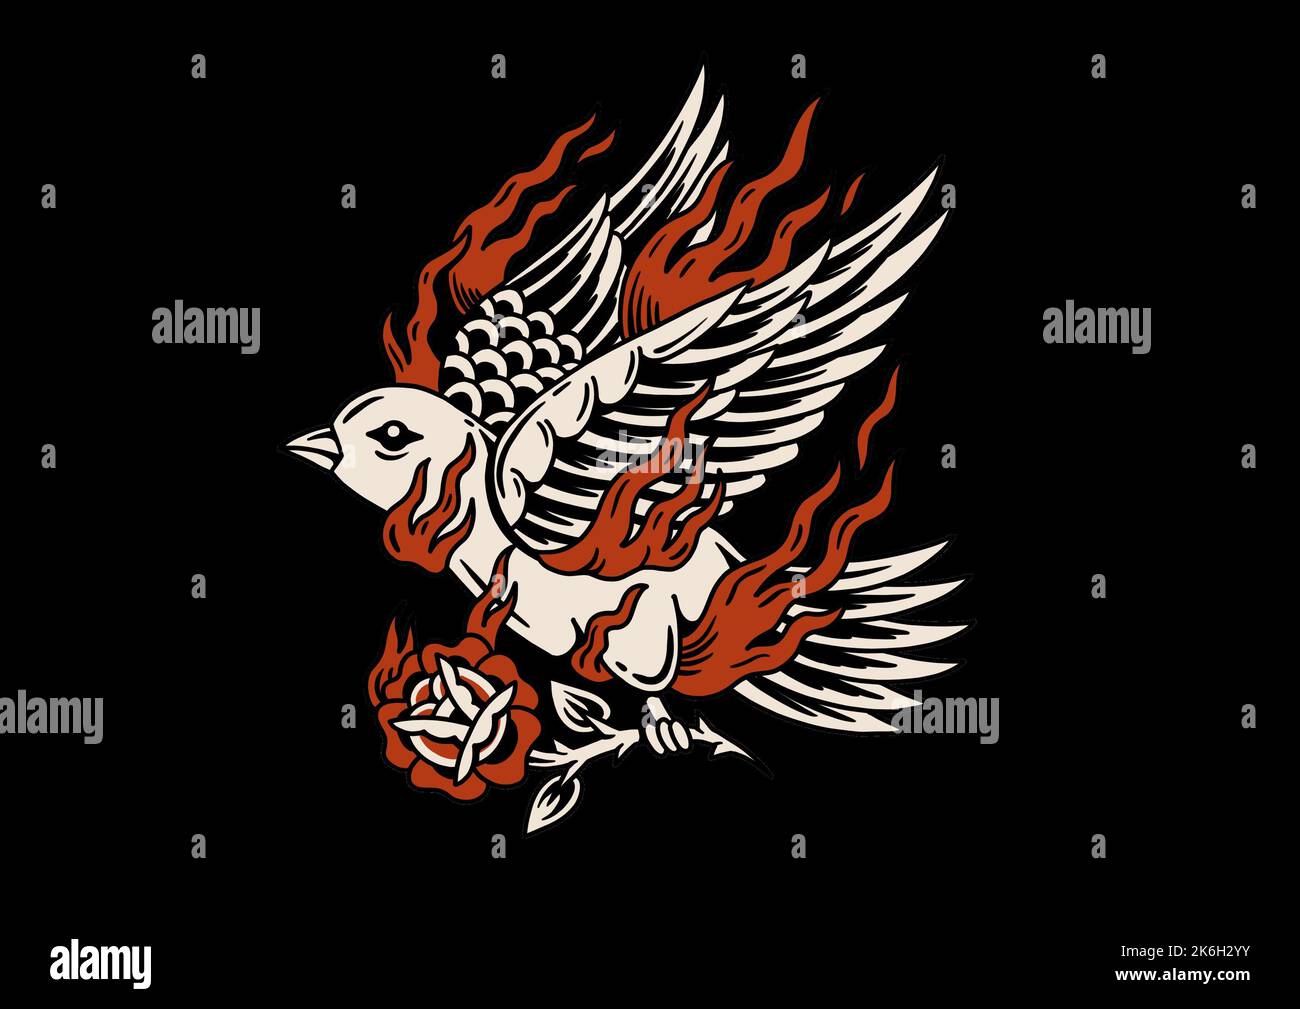 Old school traditional tattoo inspired cool graphic design illustration dove bird on fire with rose for merchandise t shirts stickers wallpapers Stock Photo